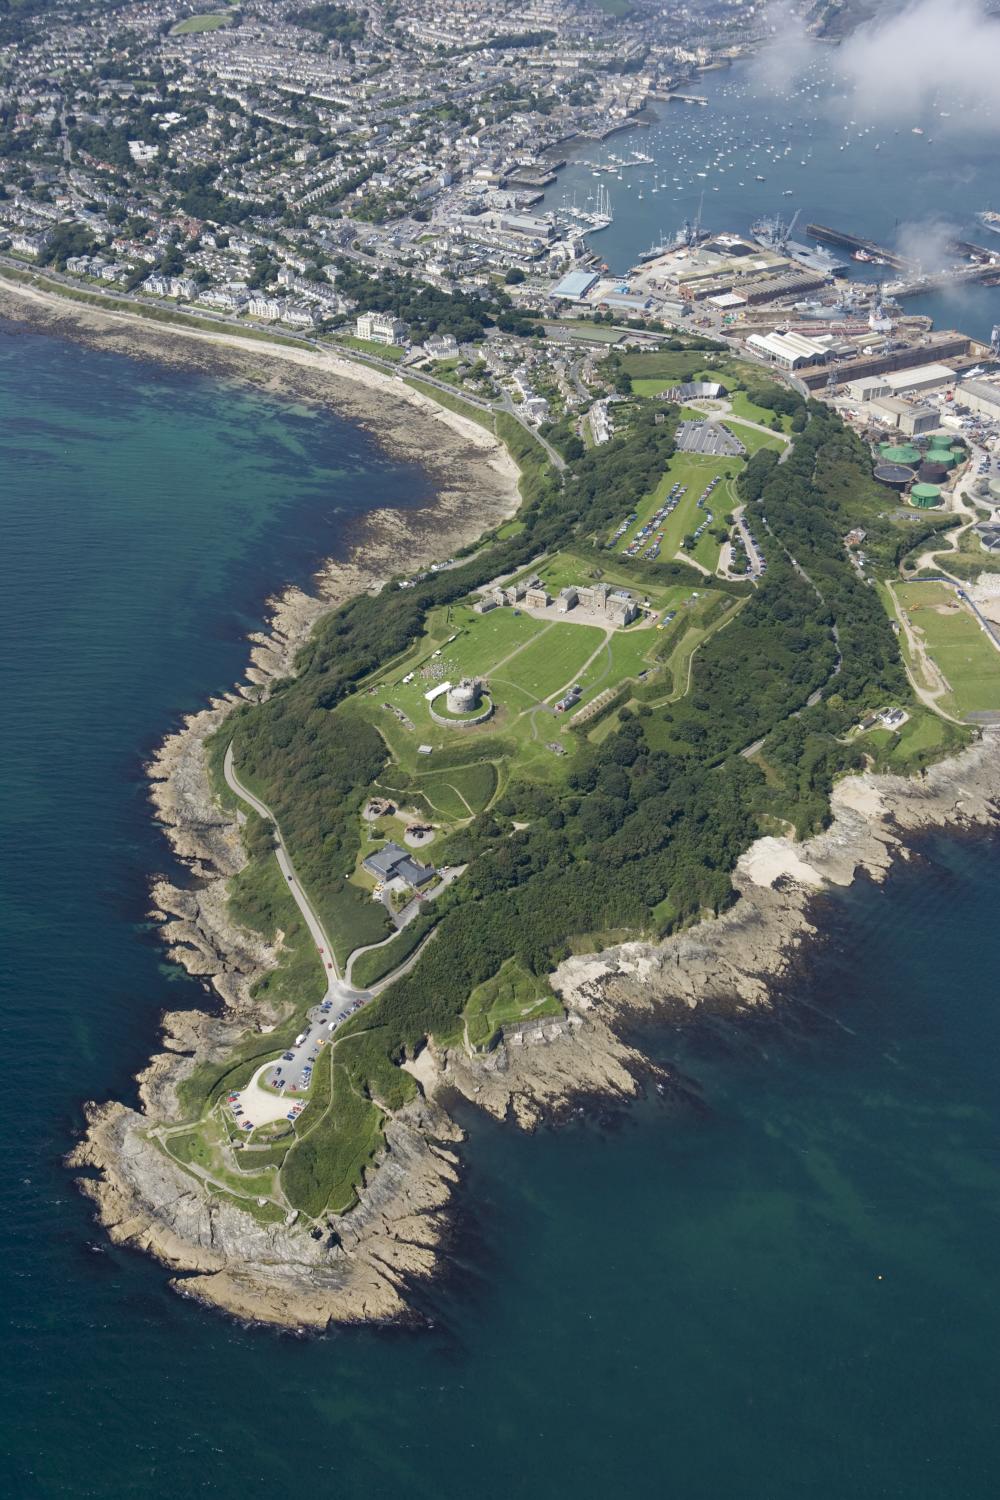 An aerial photograph of a rocky headland with a large complex of historic buildings at its centre.